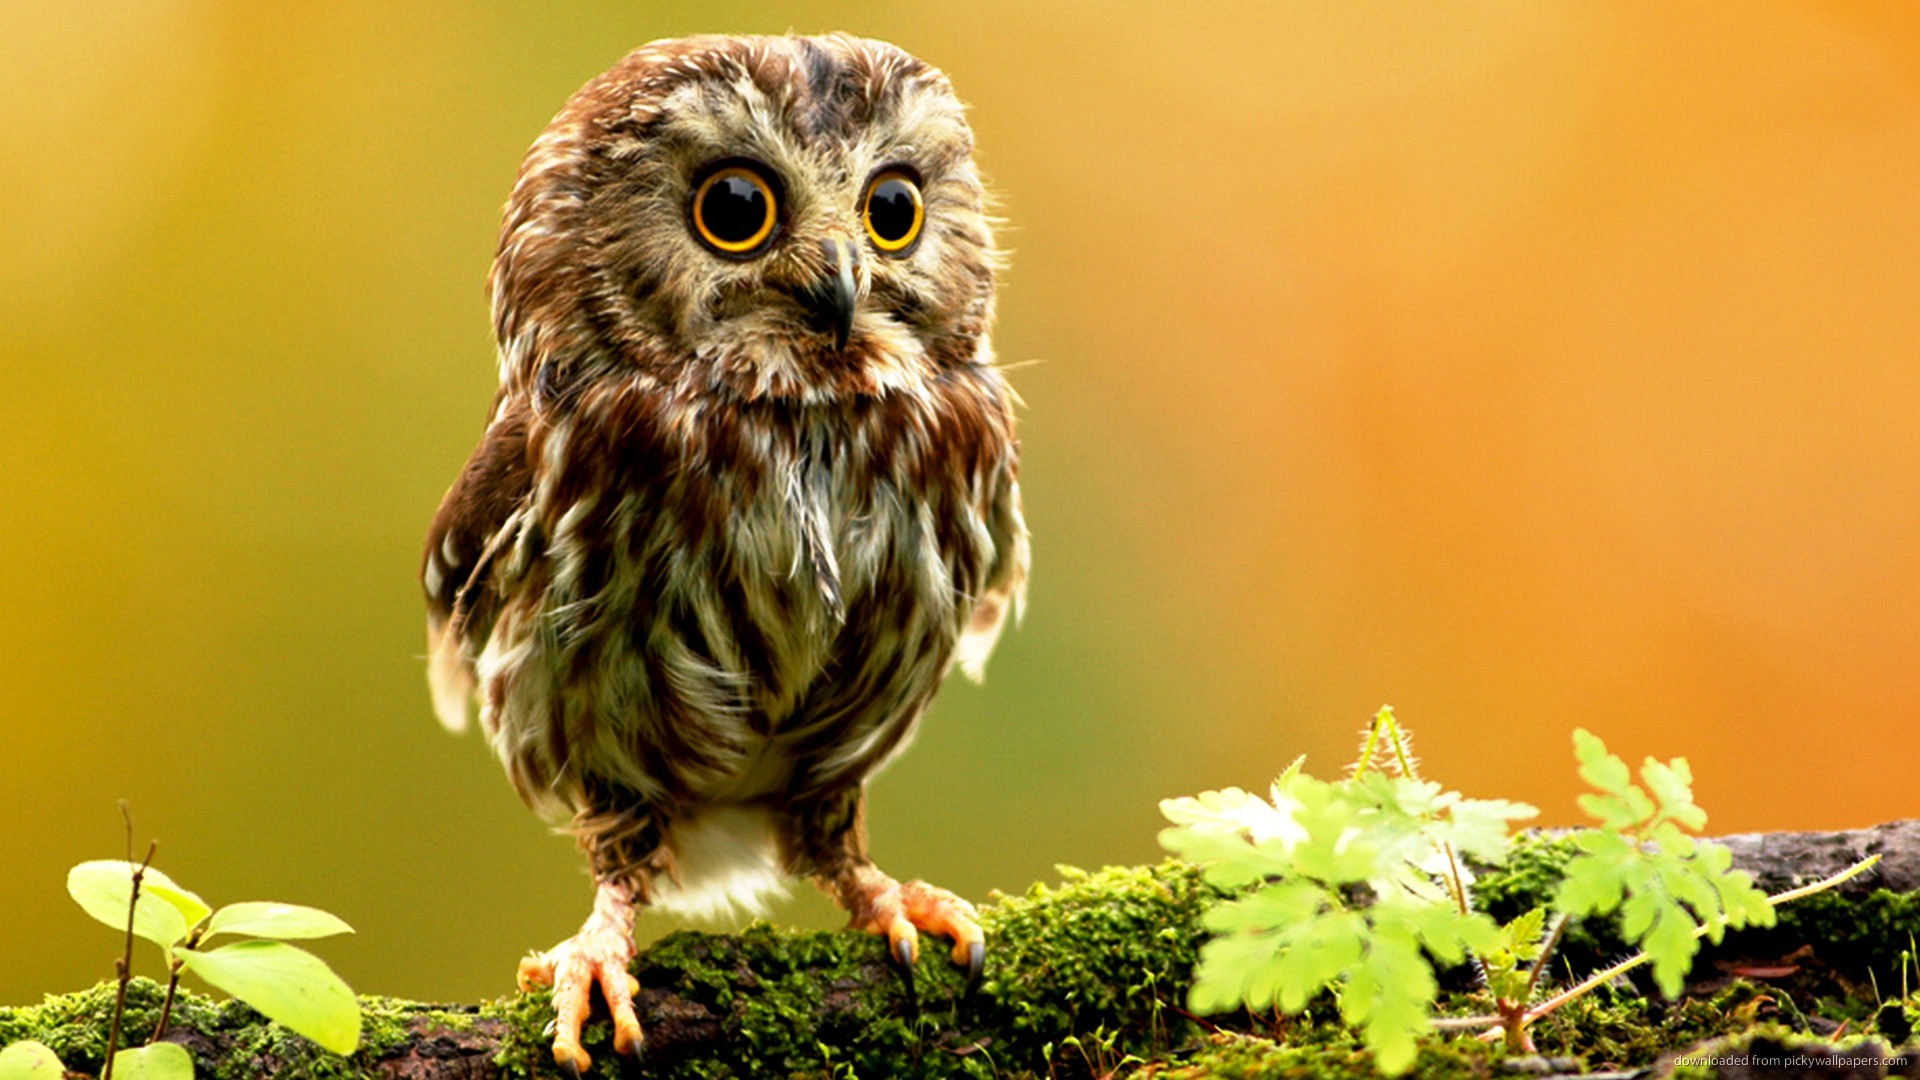 1920x1080 Cute Animal Wallpapers For Desktop Little Owl Creating Attractive Screen  Look With Cute